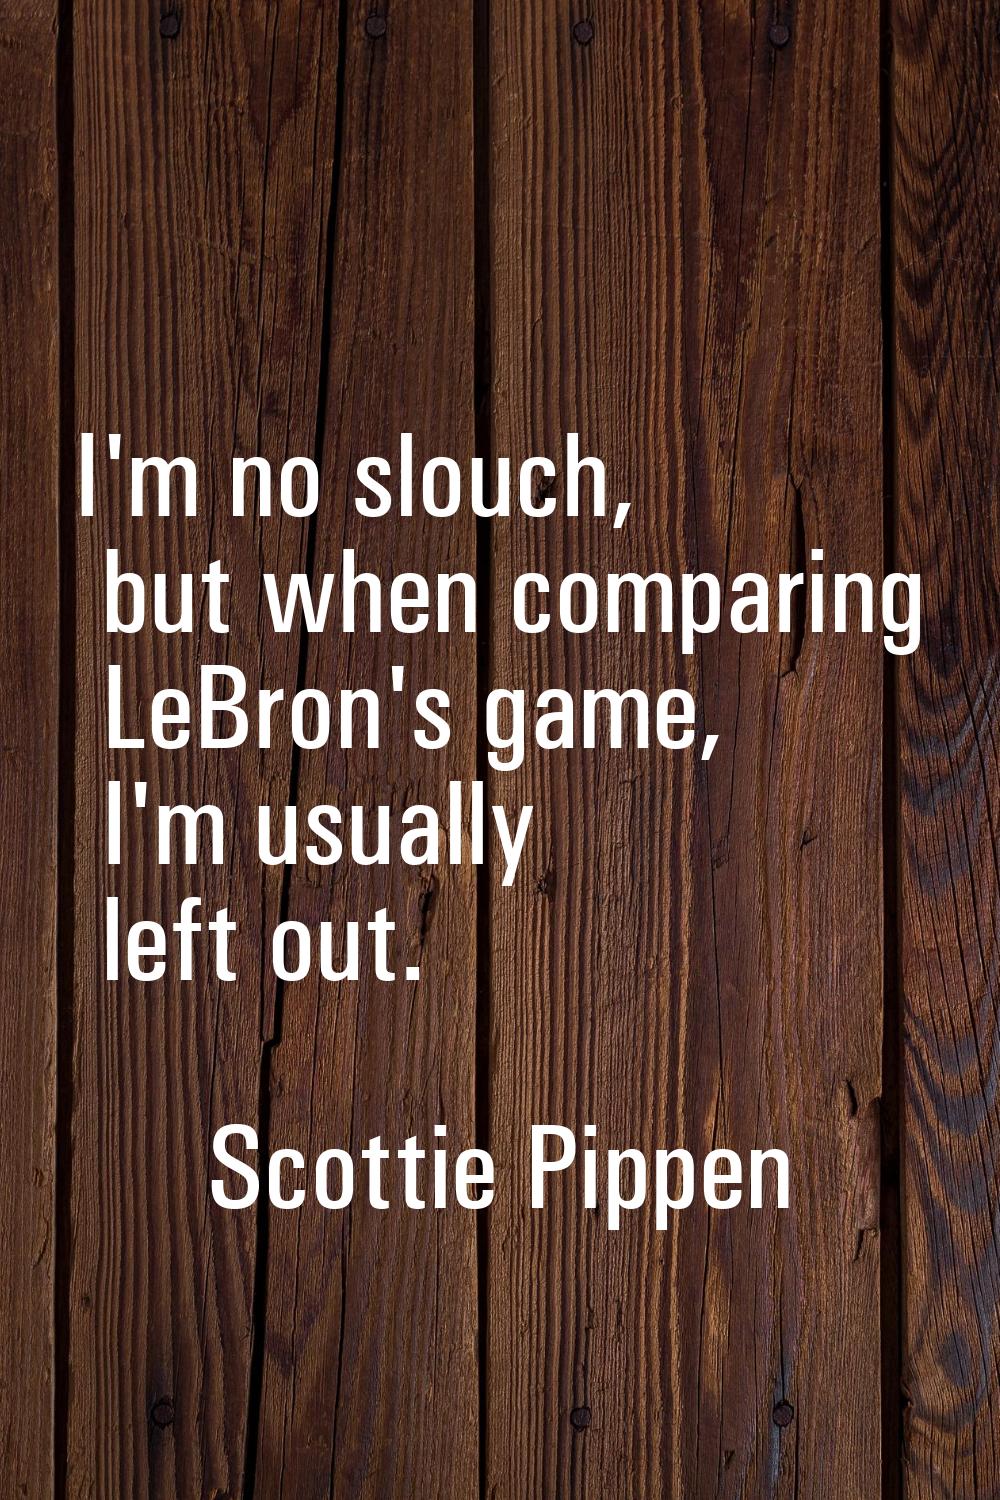 I'm no slouch, but when comparing LeBron's game, I'm usually left out.